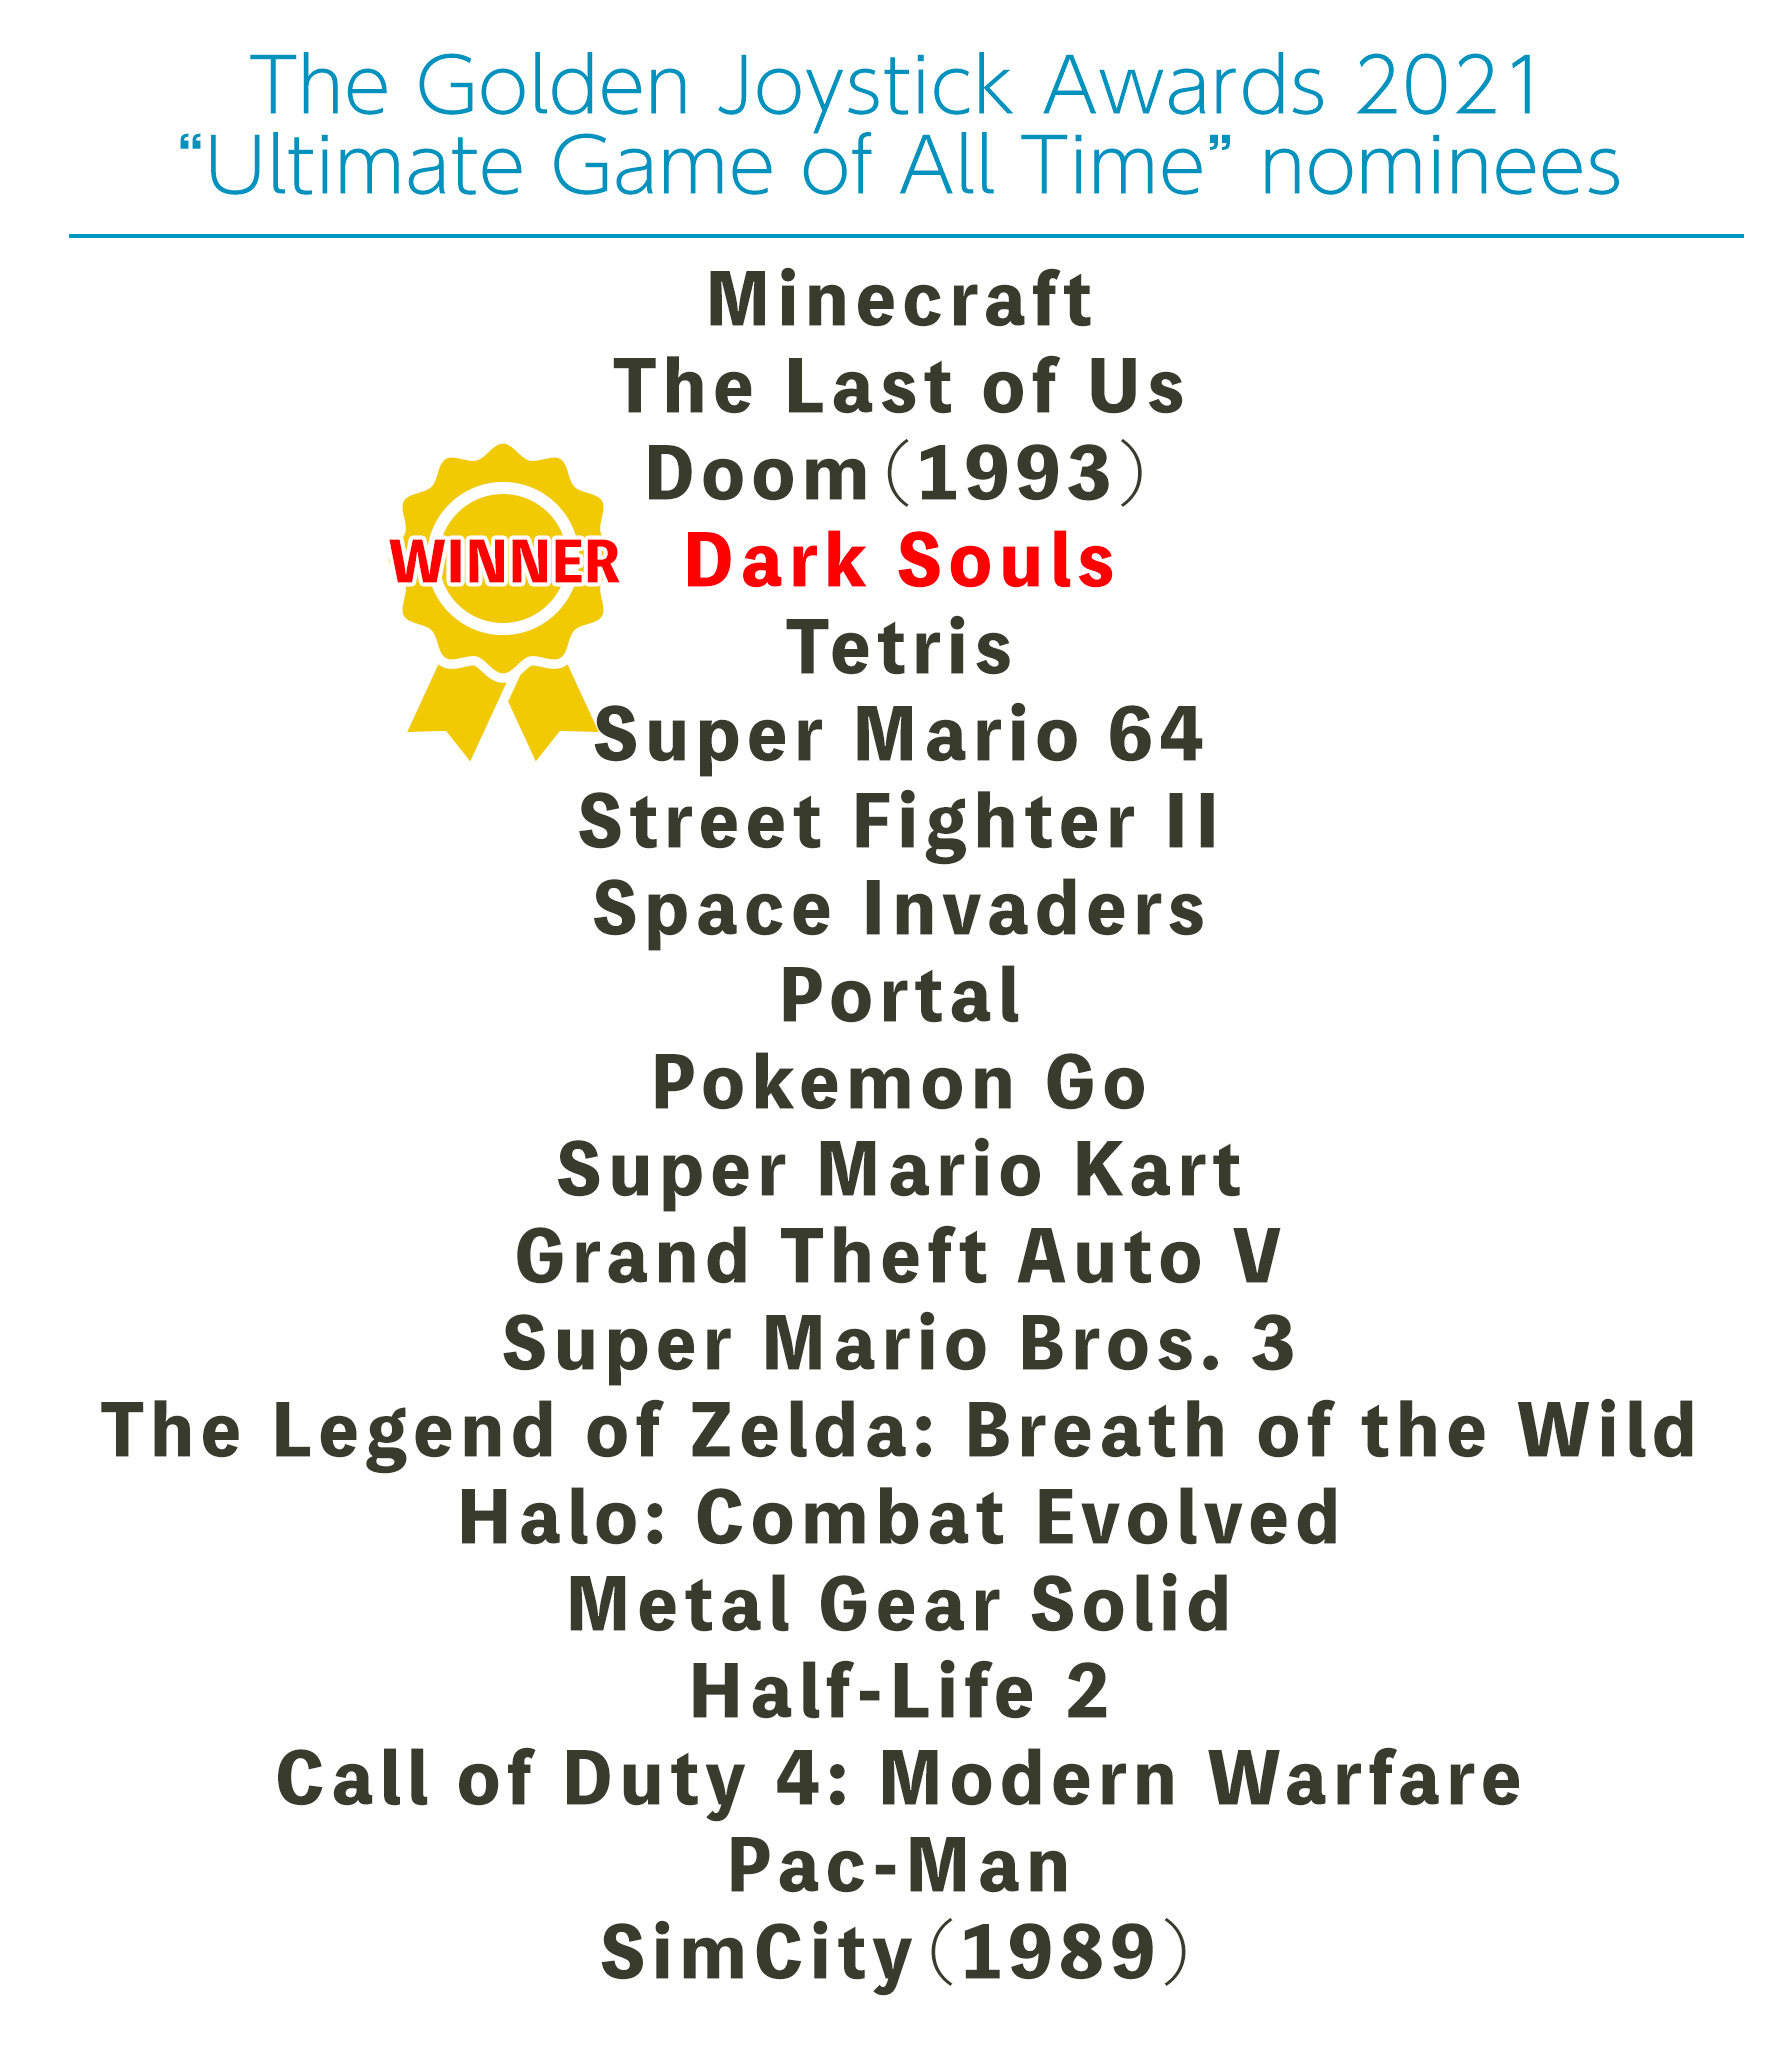 Okami Games Twitter: "Dark Souls won the Golden Joystick award for "Ultimate Game of All Time" out an list of competition. Arguably the most influential franchise of the 2010s